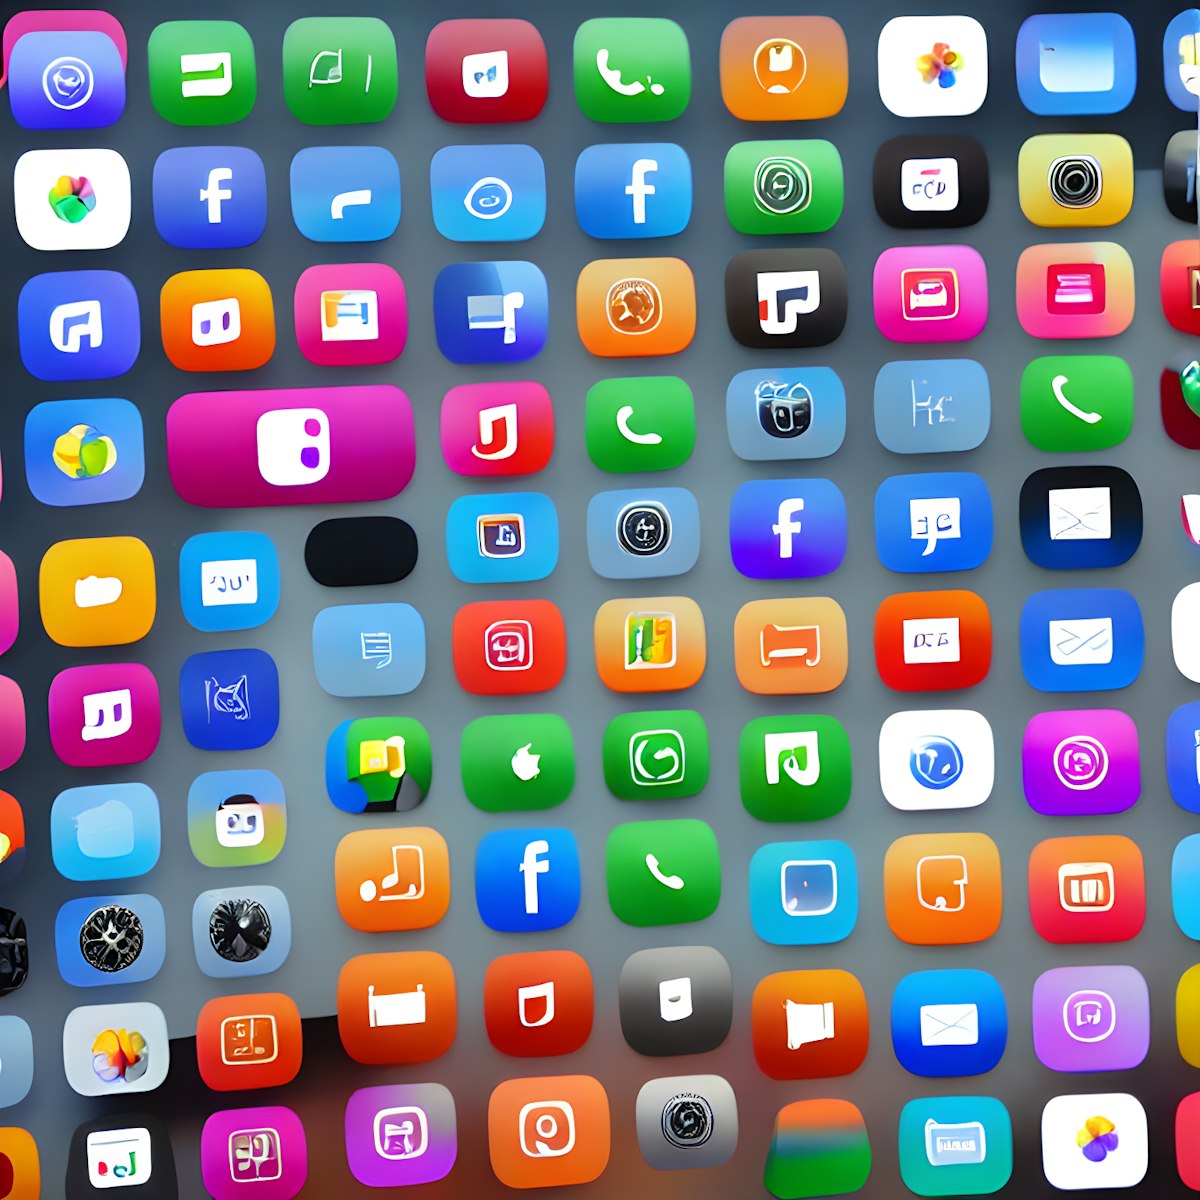 featured image - Apple’s Icons Have That Shape for a Very Good Reason